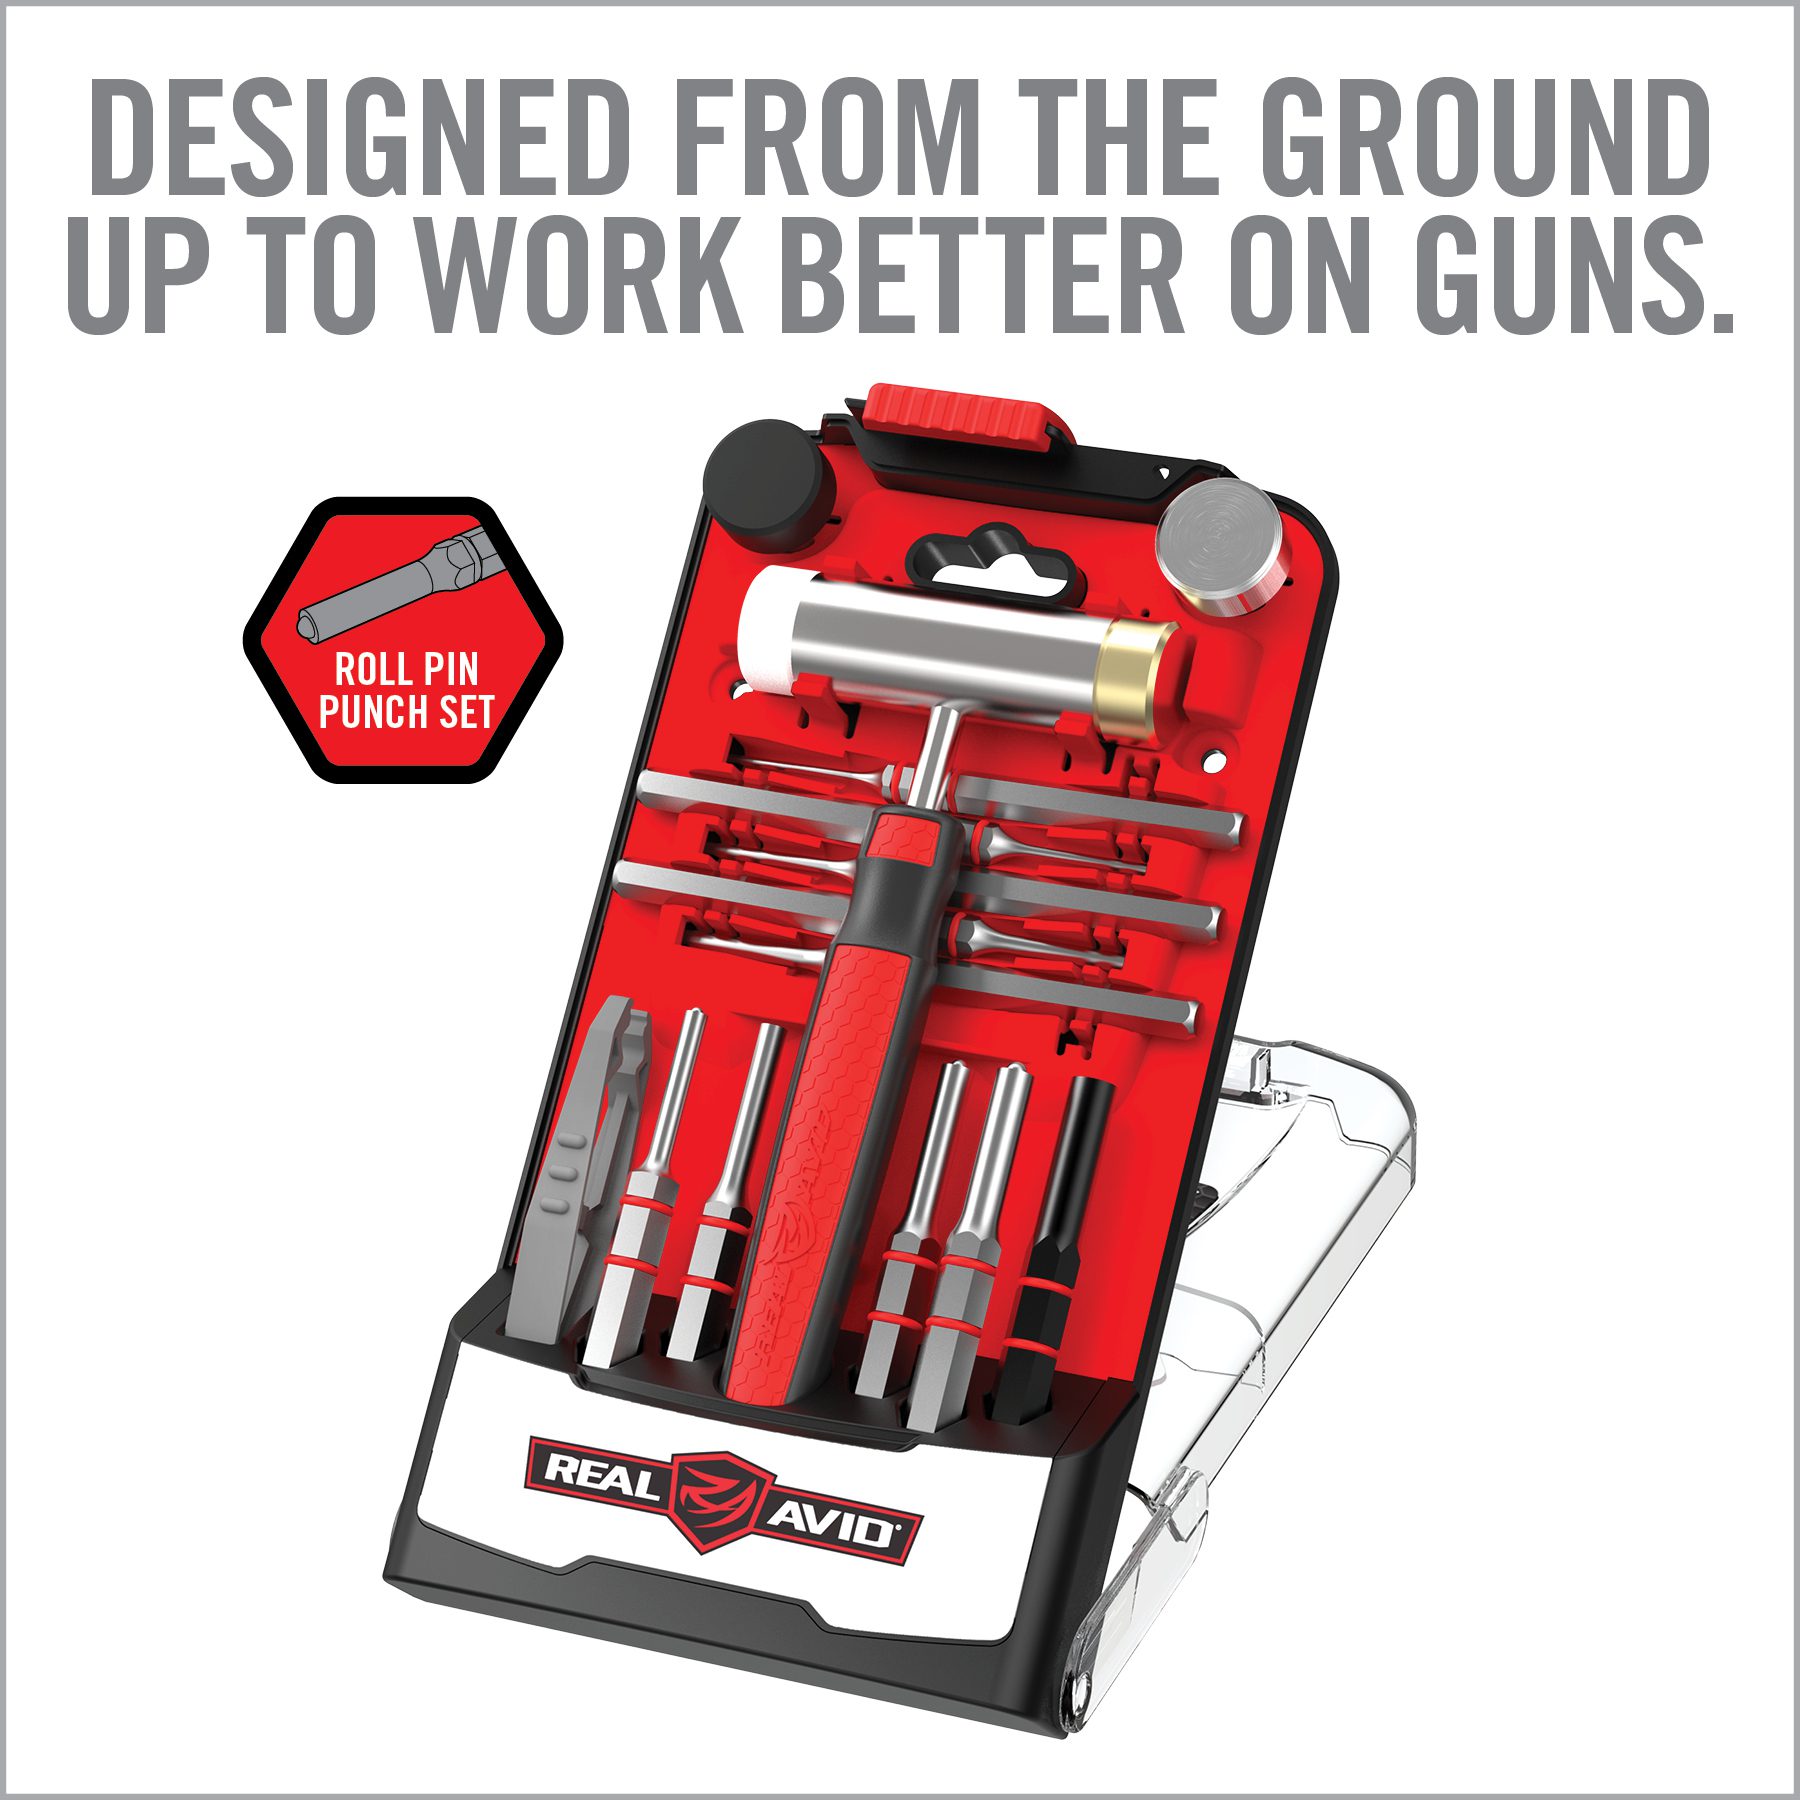 a red tool kit with tools in it